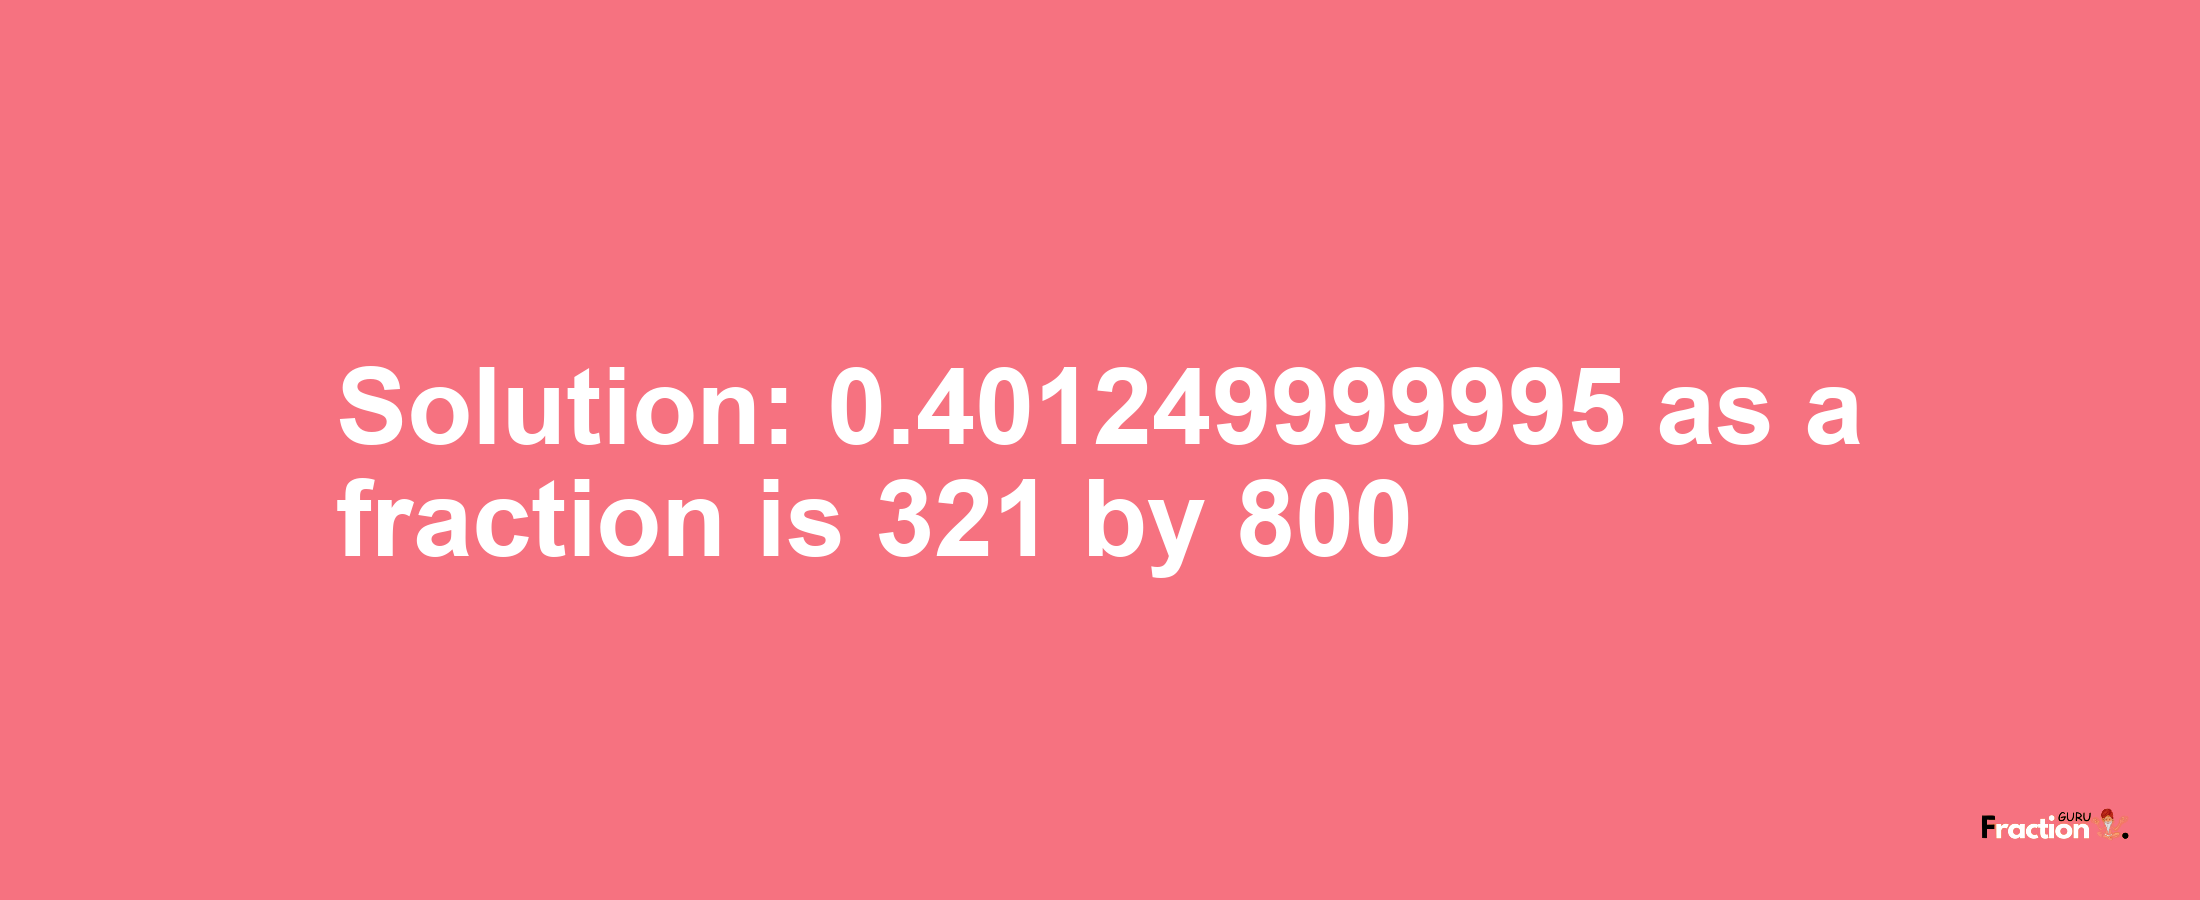 Solution:0.401249999995 as a fraction is 321/800